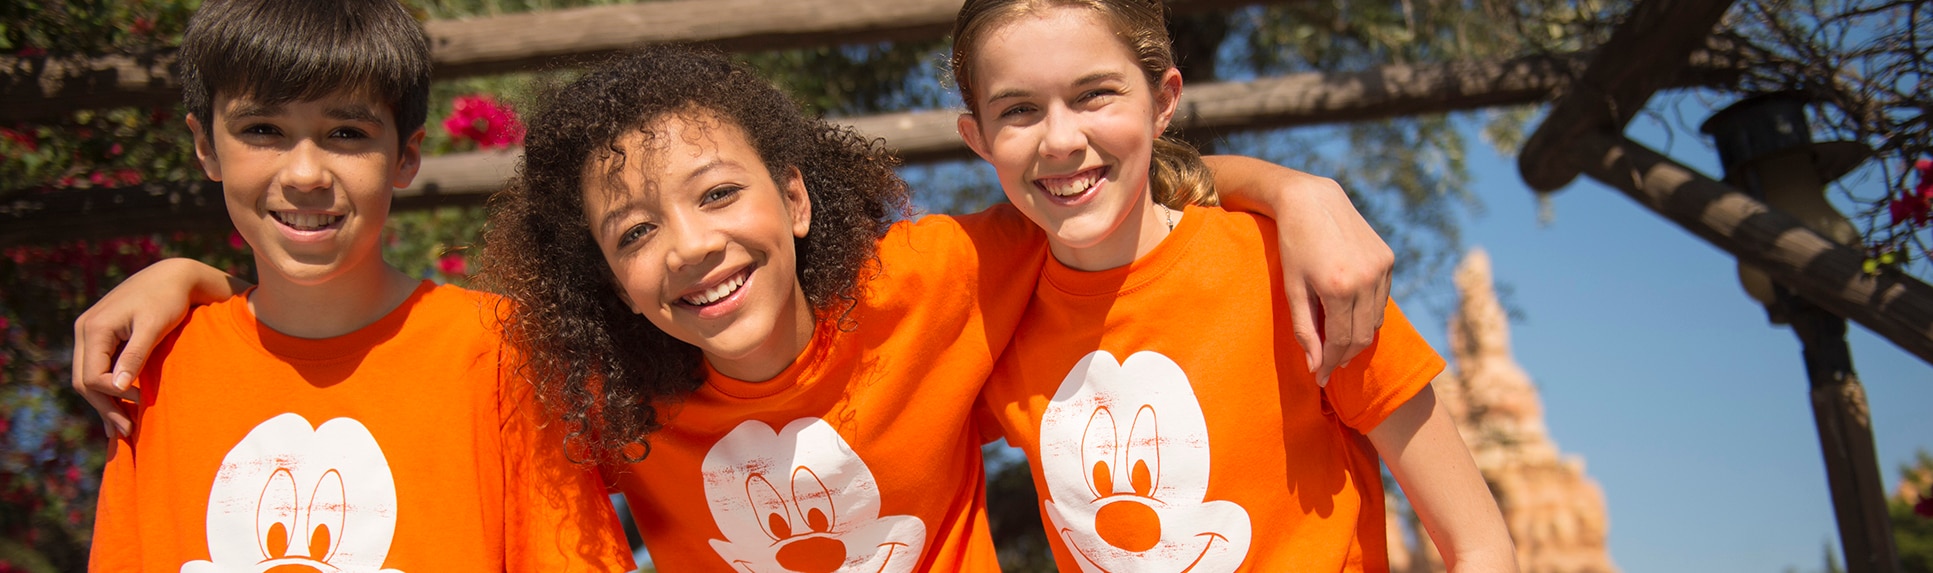 Smiling kids wearing matching shirts with Mickey Mouse logos